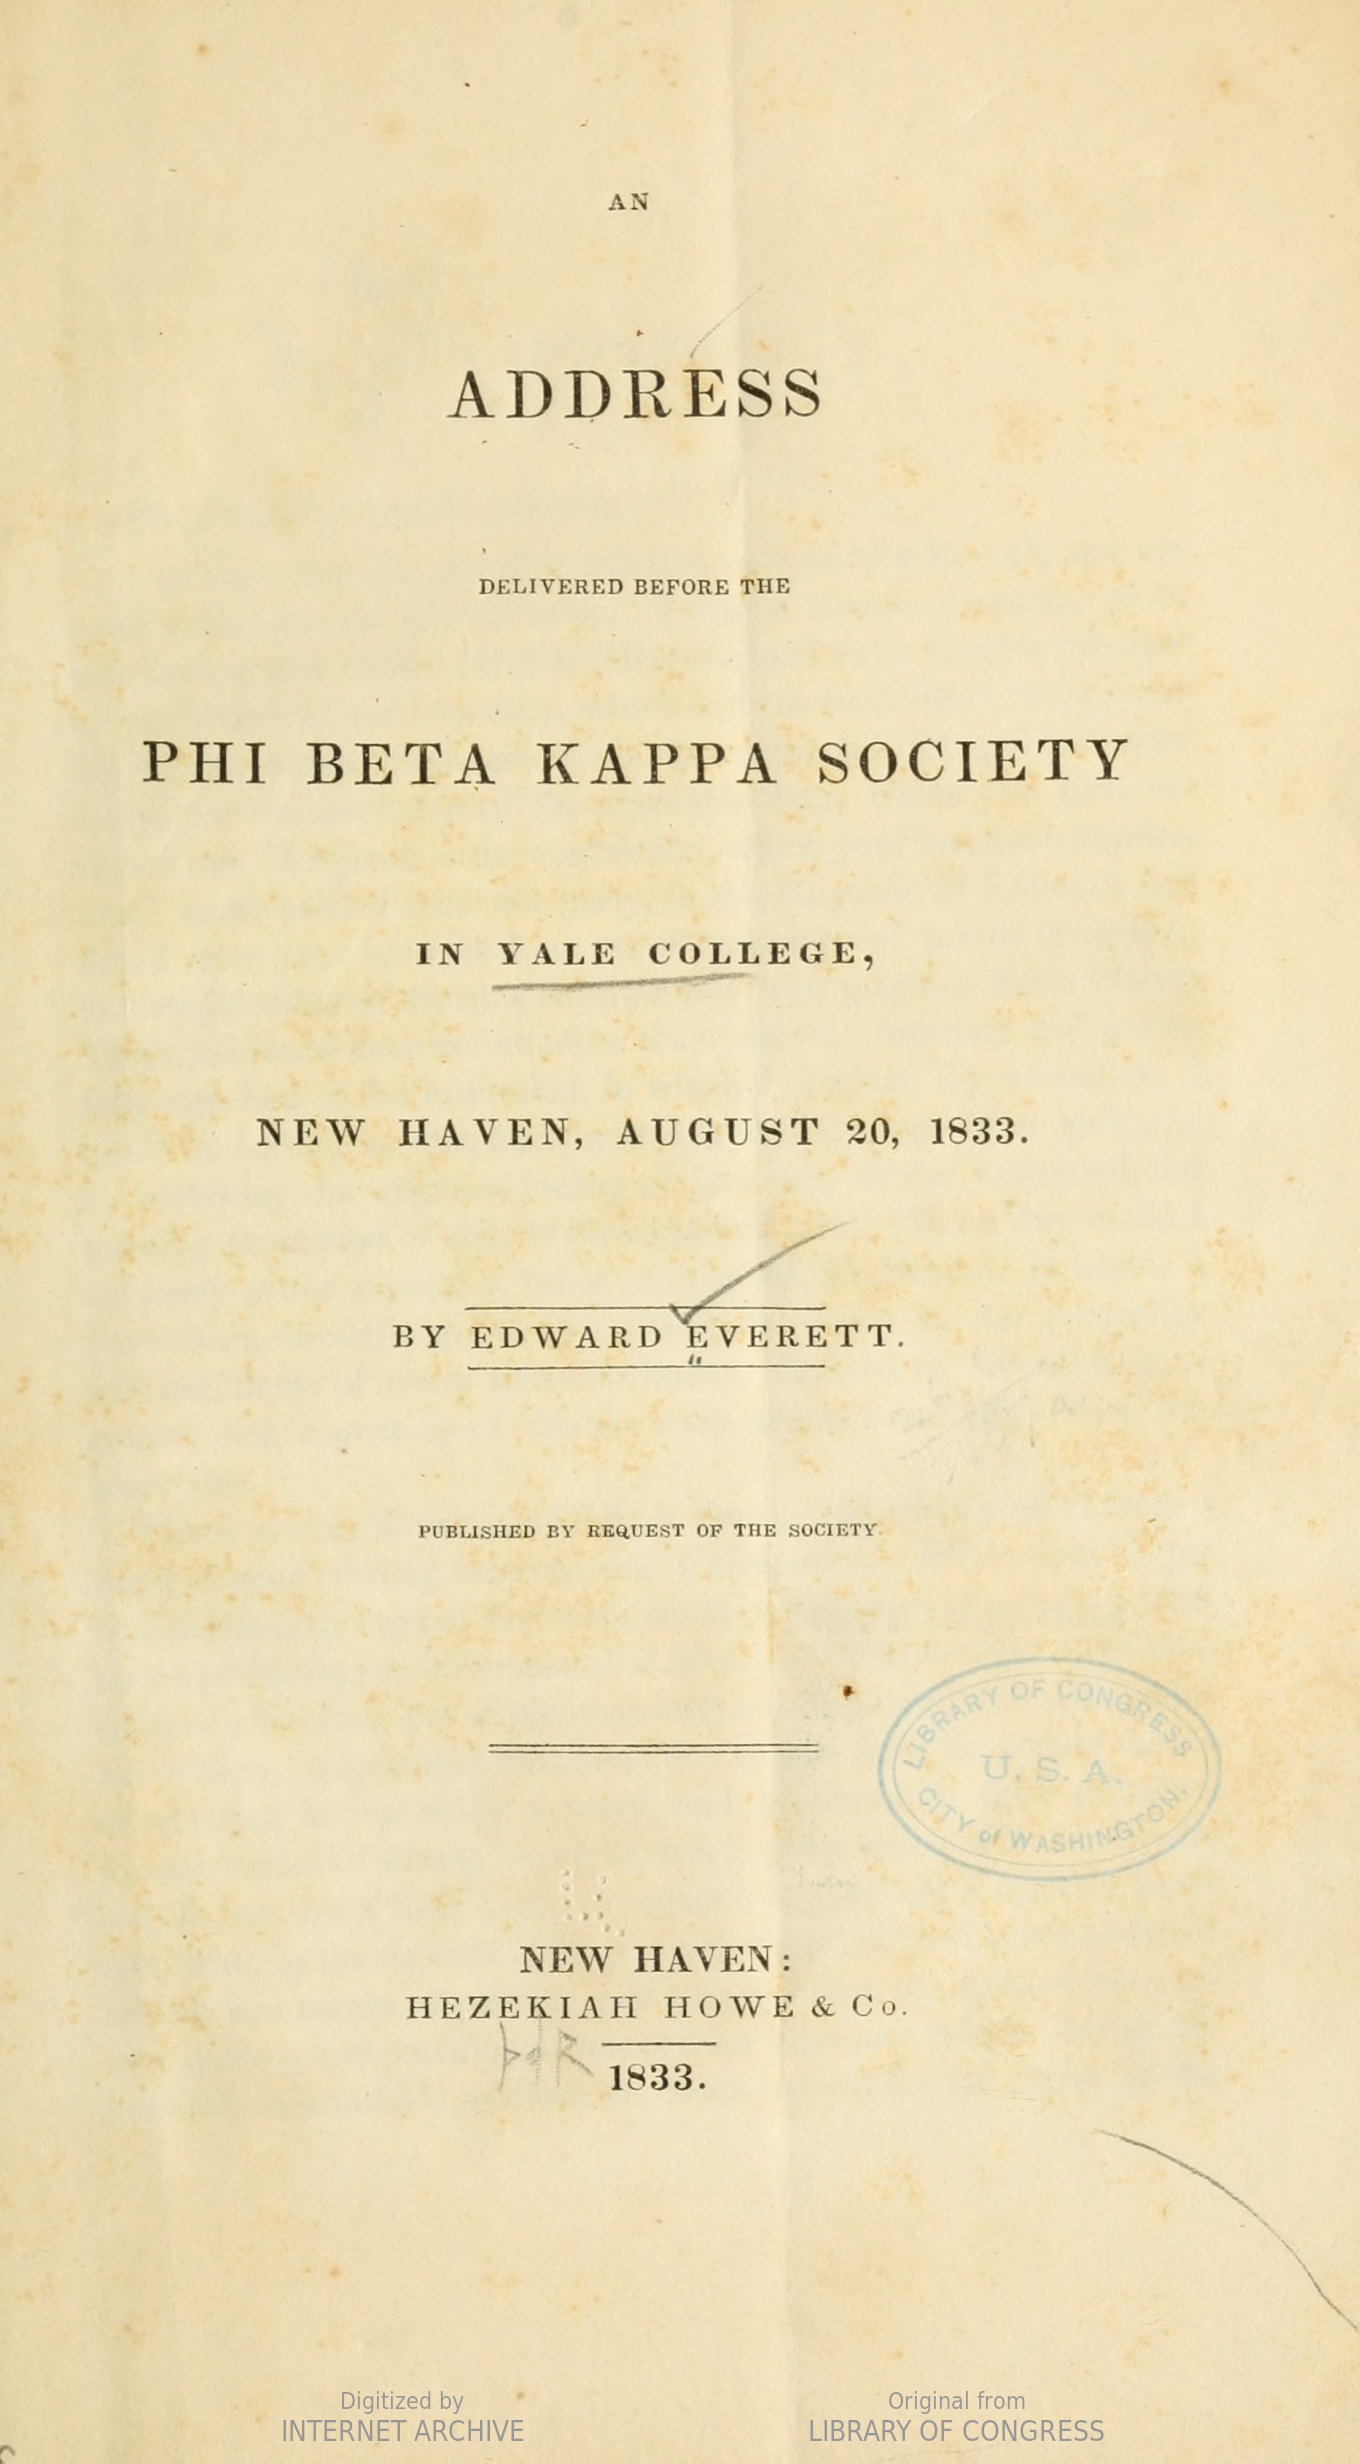 Everett’s address before the Phi Beta Kappa Society in Yale College, Essay